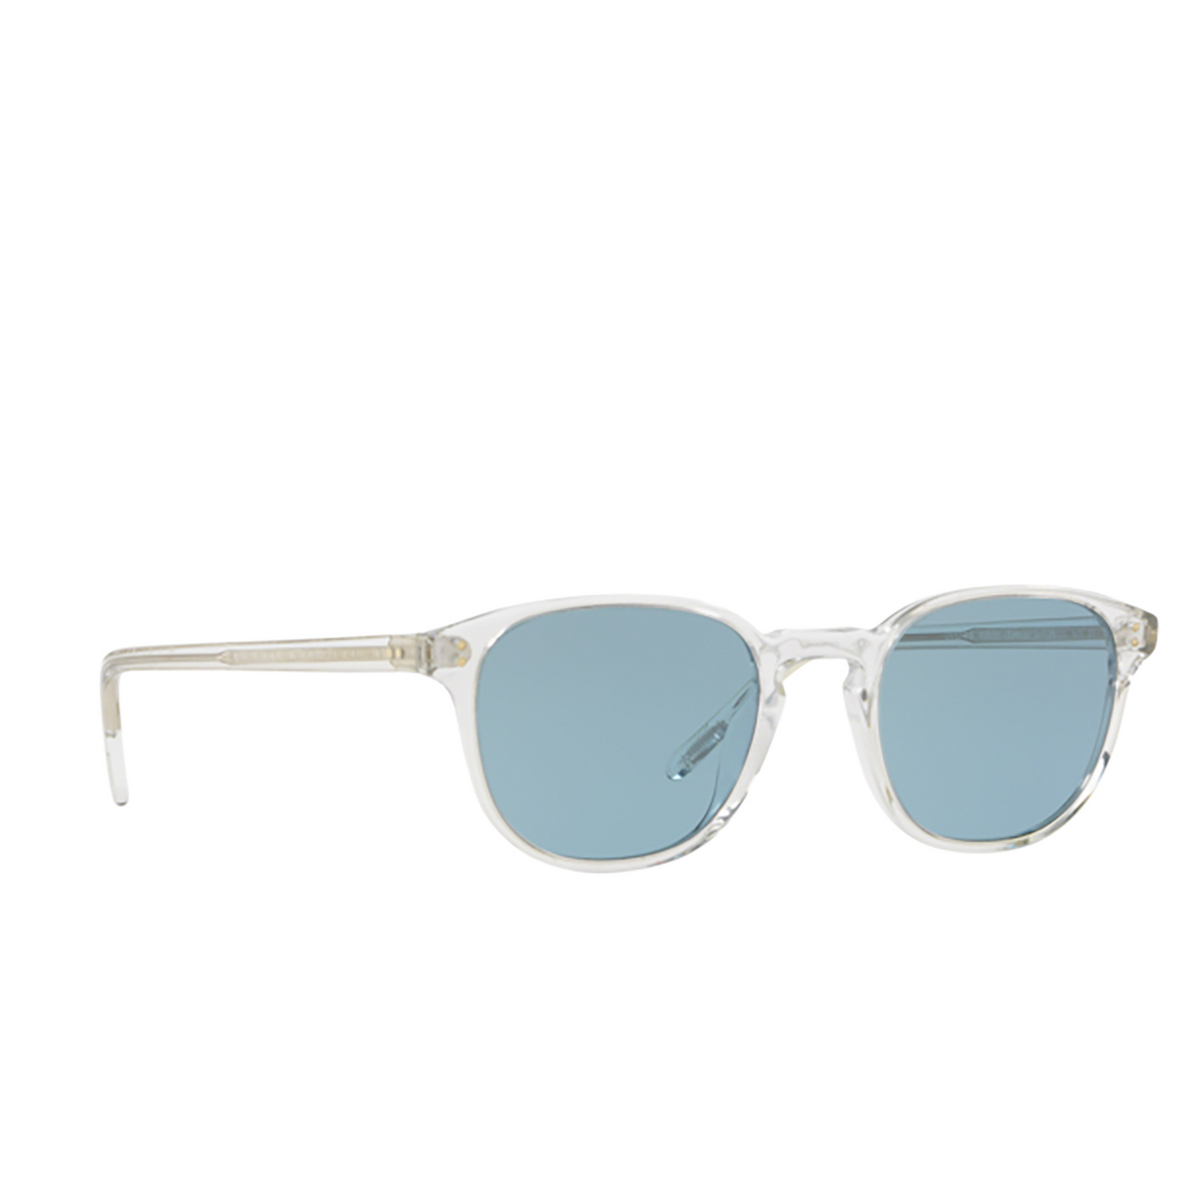 Oliver Peoples FAIRMONT Sunglasses 110156 Crystal - three-quarters view